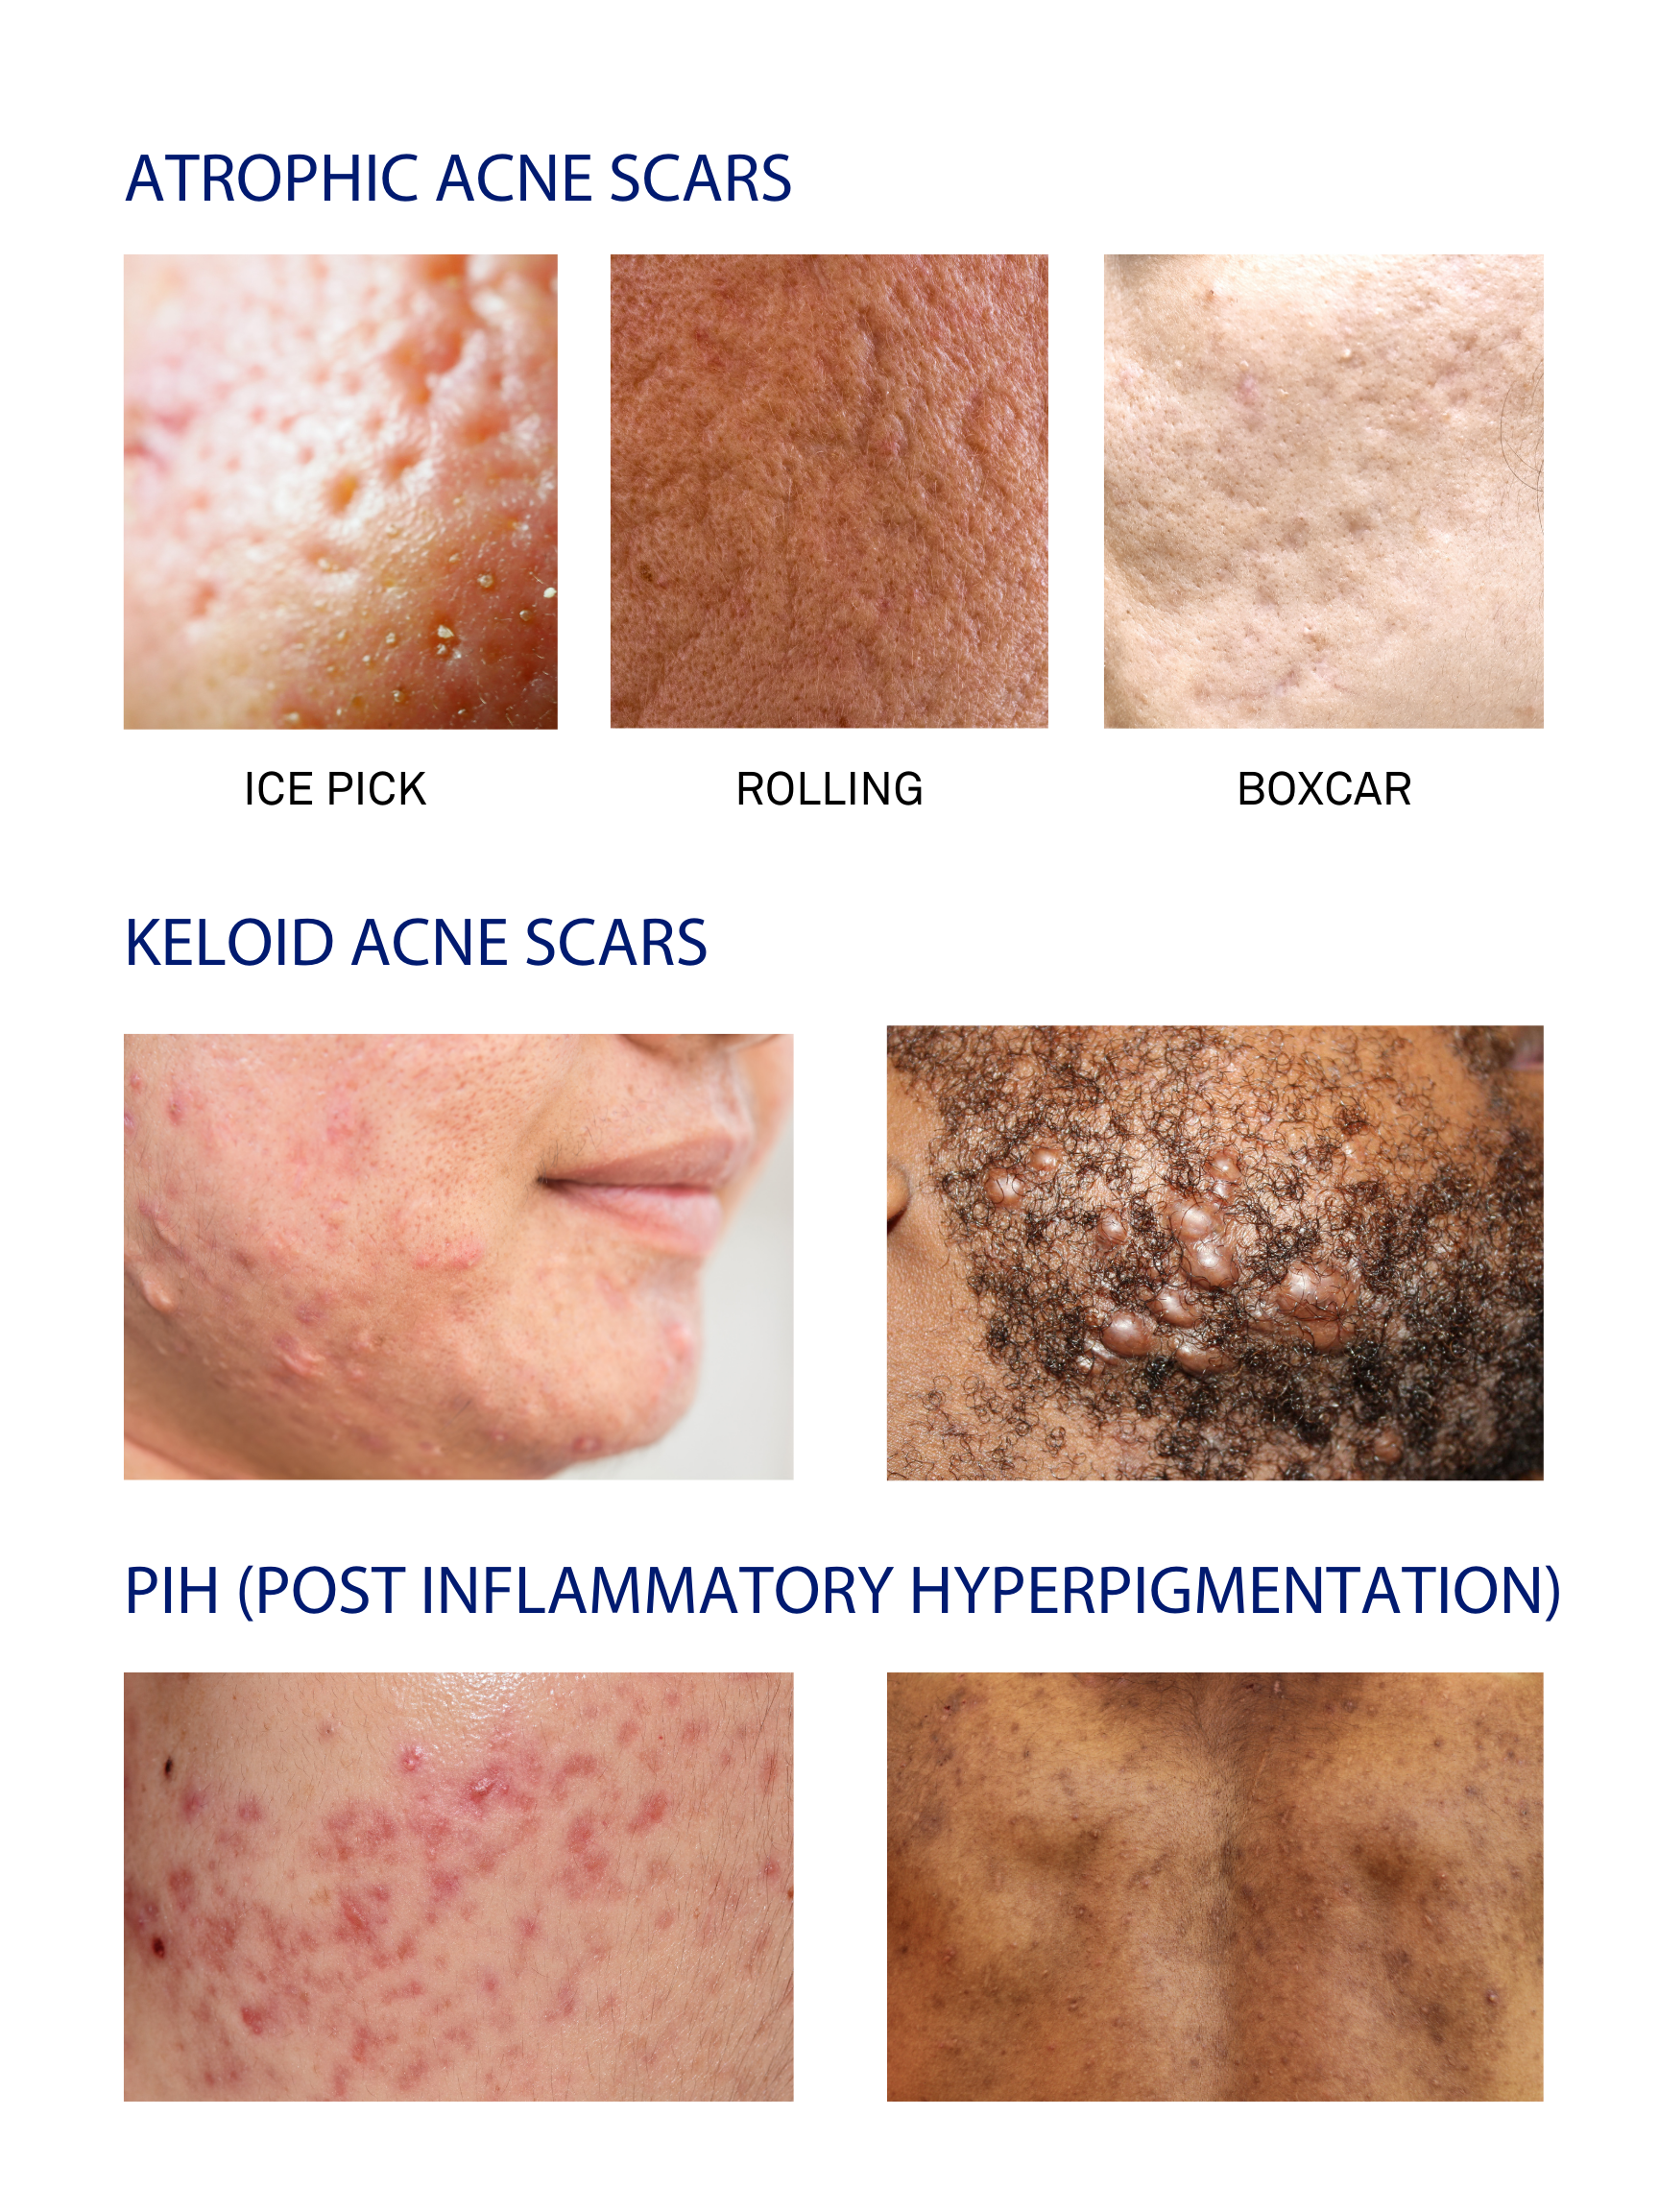 an image depicting the classifications of acne scars, including atrophic scars (such as ice pick, boxcar, and rolling scars), keloid scars, and post-inflammatory hyperpigmentation